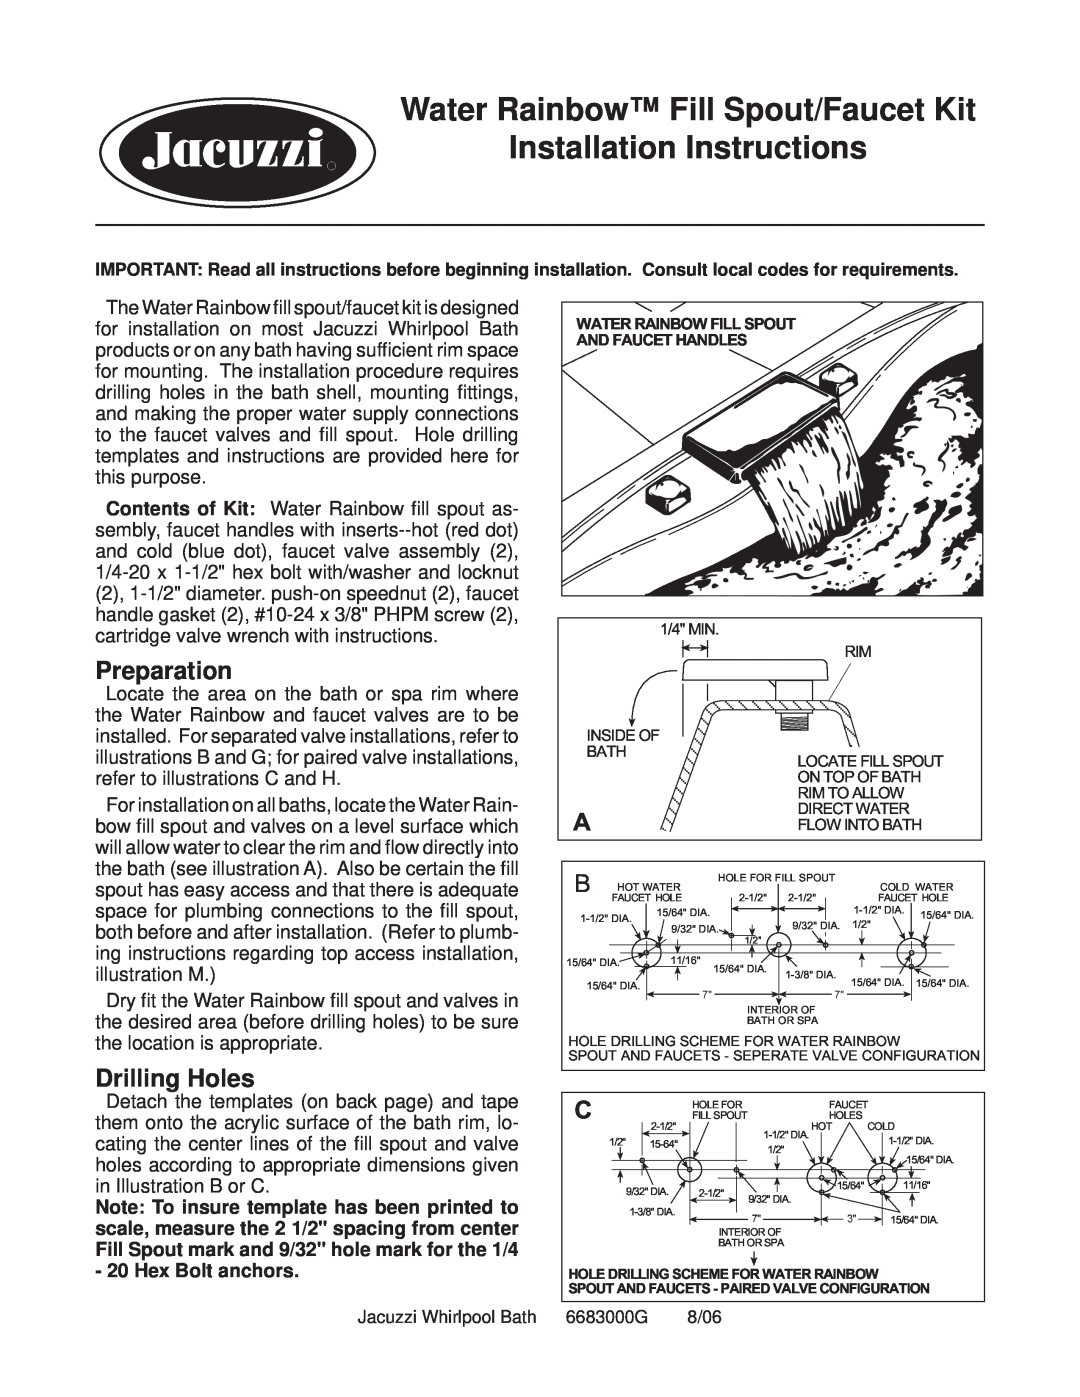 Jacuzzi installation instructions Preparation, Drilling Holes, Water Rainbow Fill Spout/Faucet Kit 